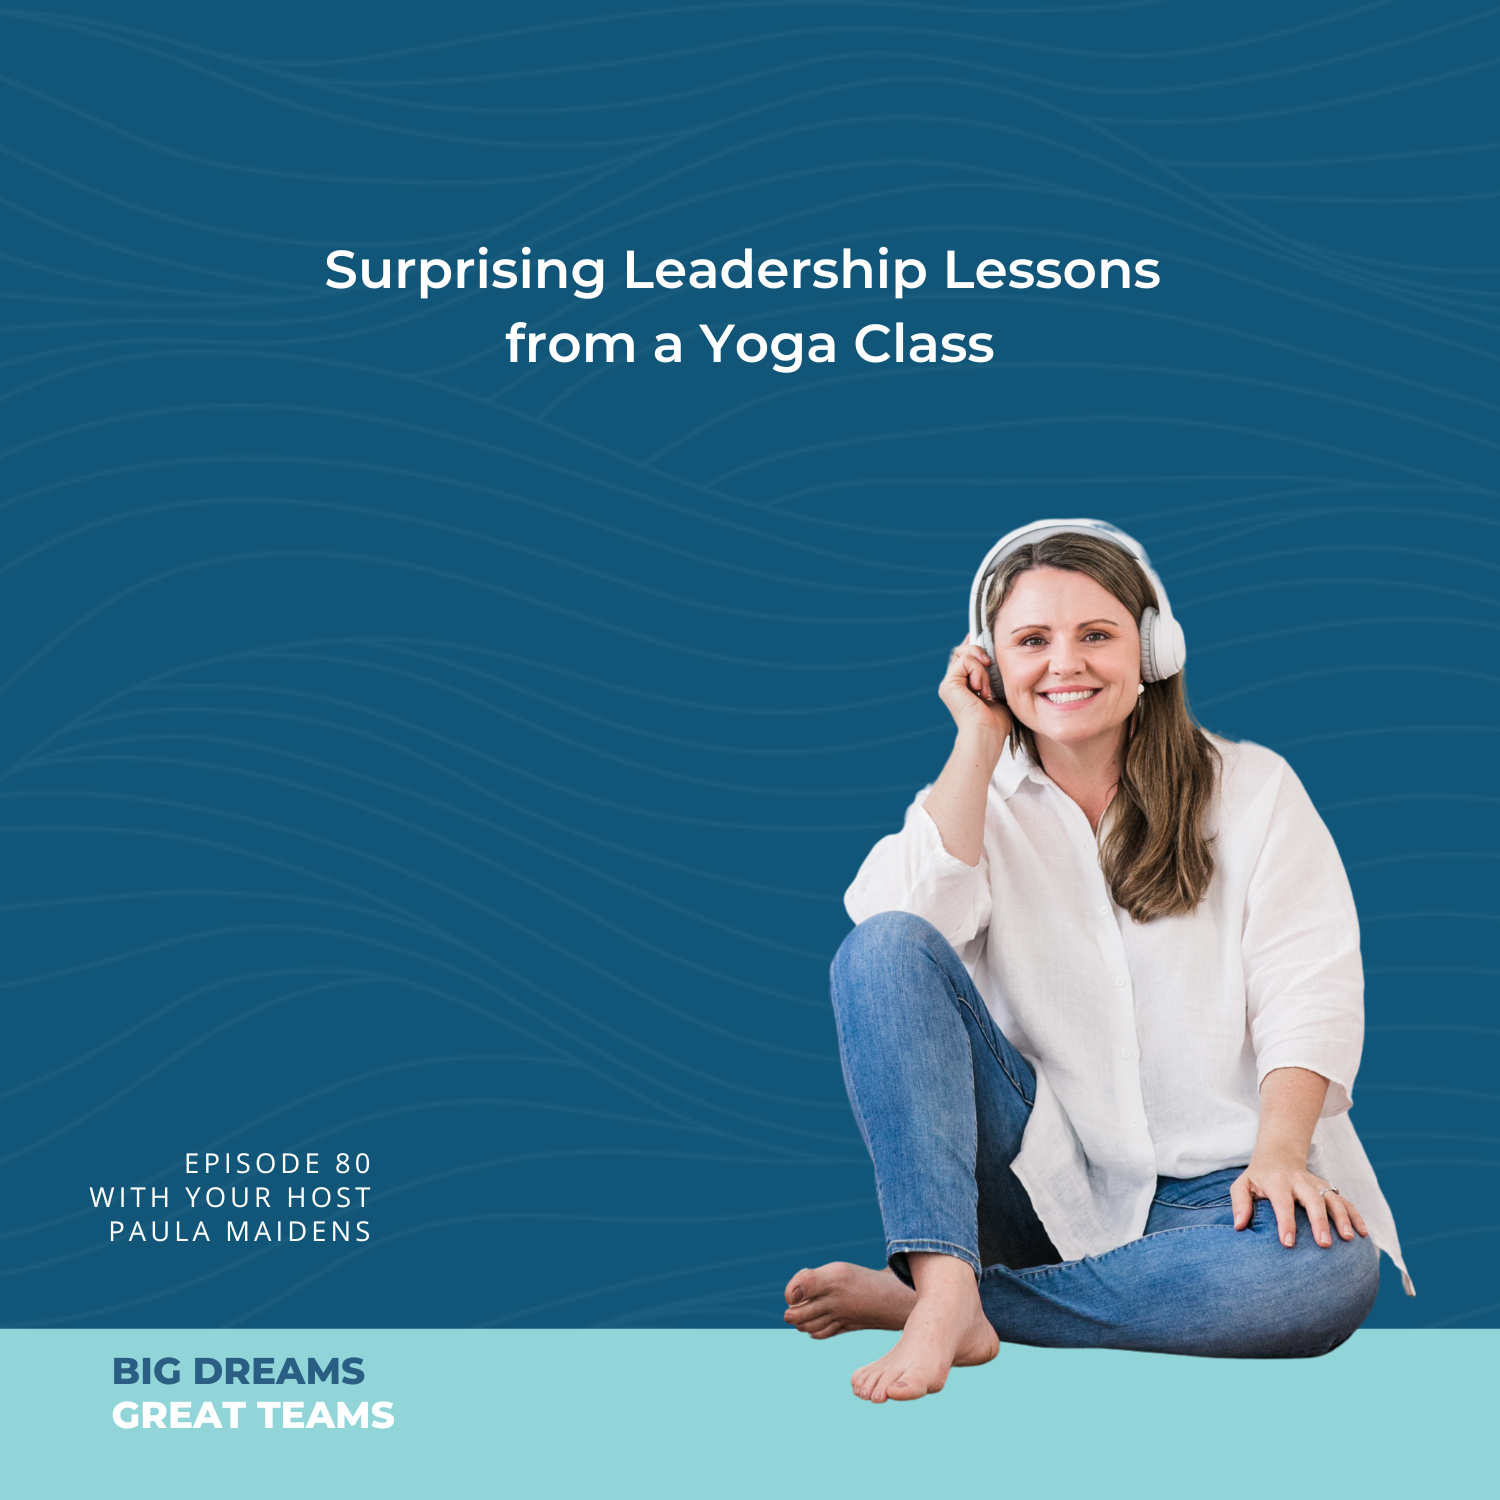 Episode #80 - Surprising Leadership Lessons from a Yoga Class